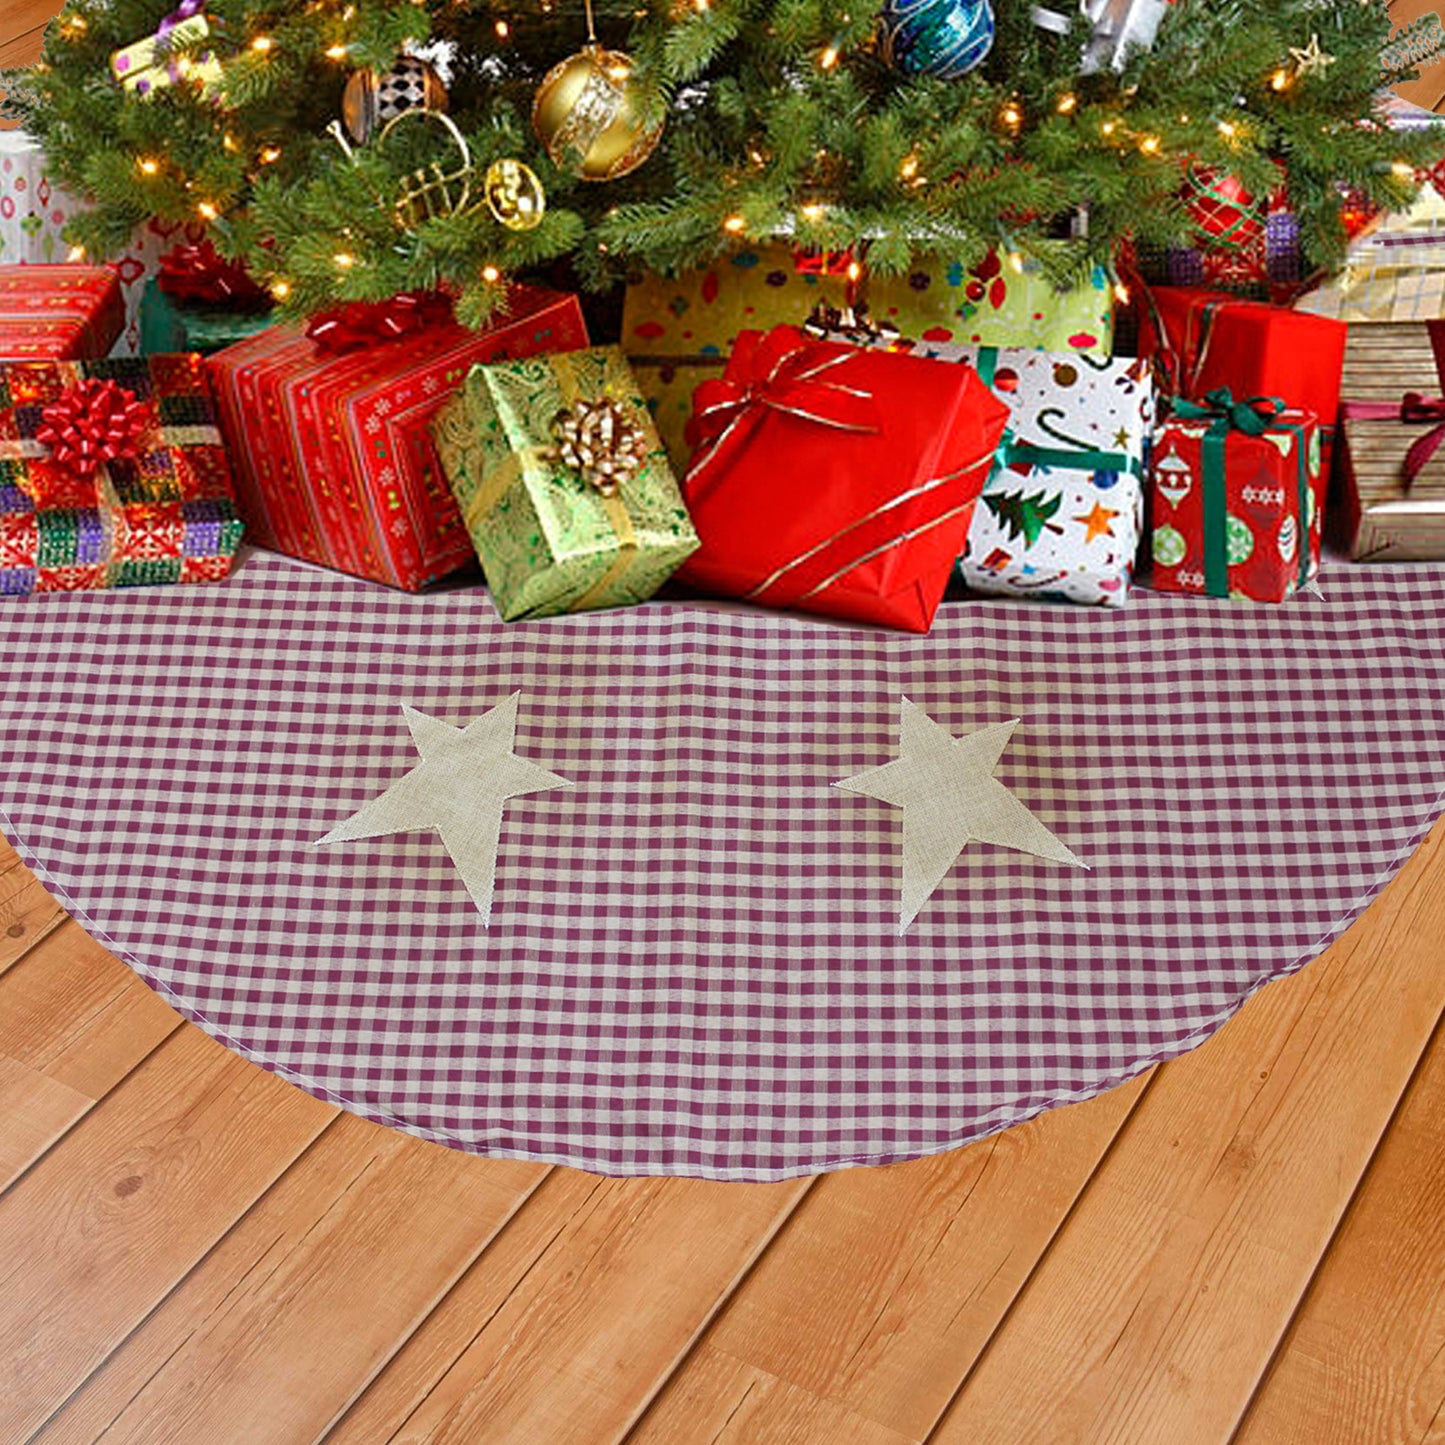 CVHOMEDECO. Country Rustic 50 Inch Christmas Tree Skirt Double Layers Burgundy Plaid Stitching Eight Burlap Stars for Christmas Holiday Party Décor.